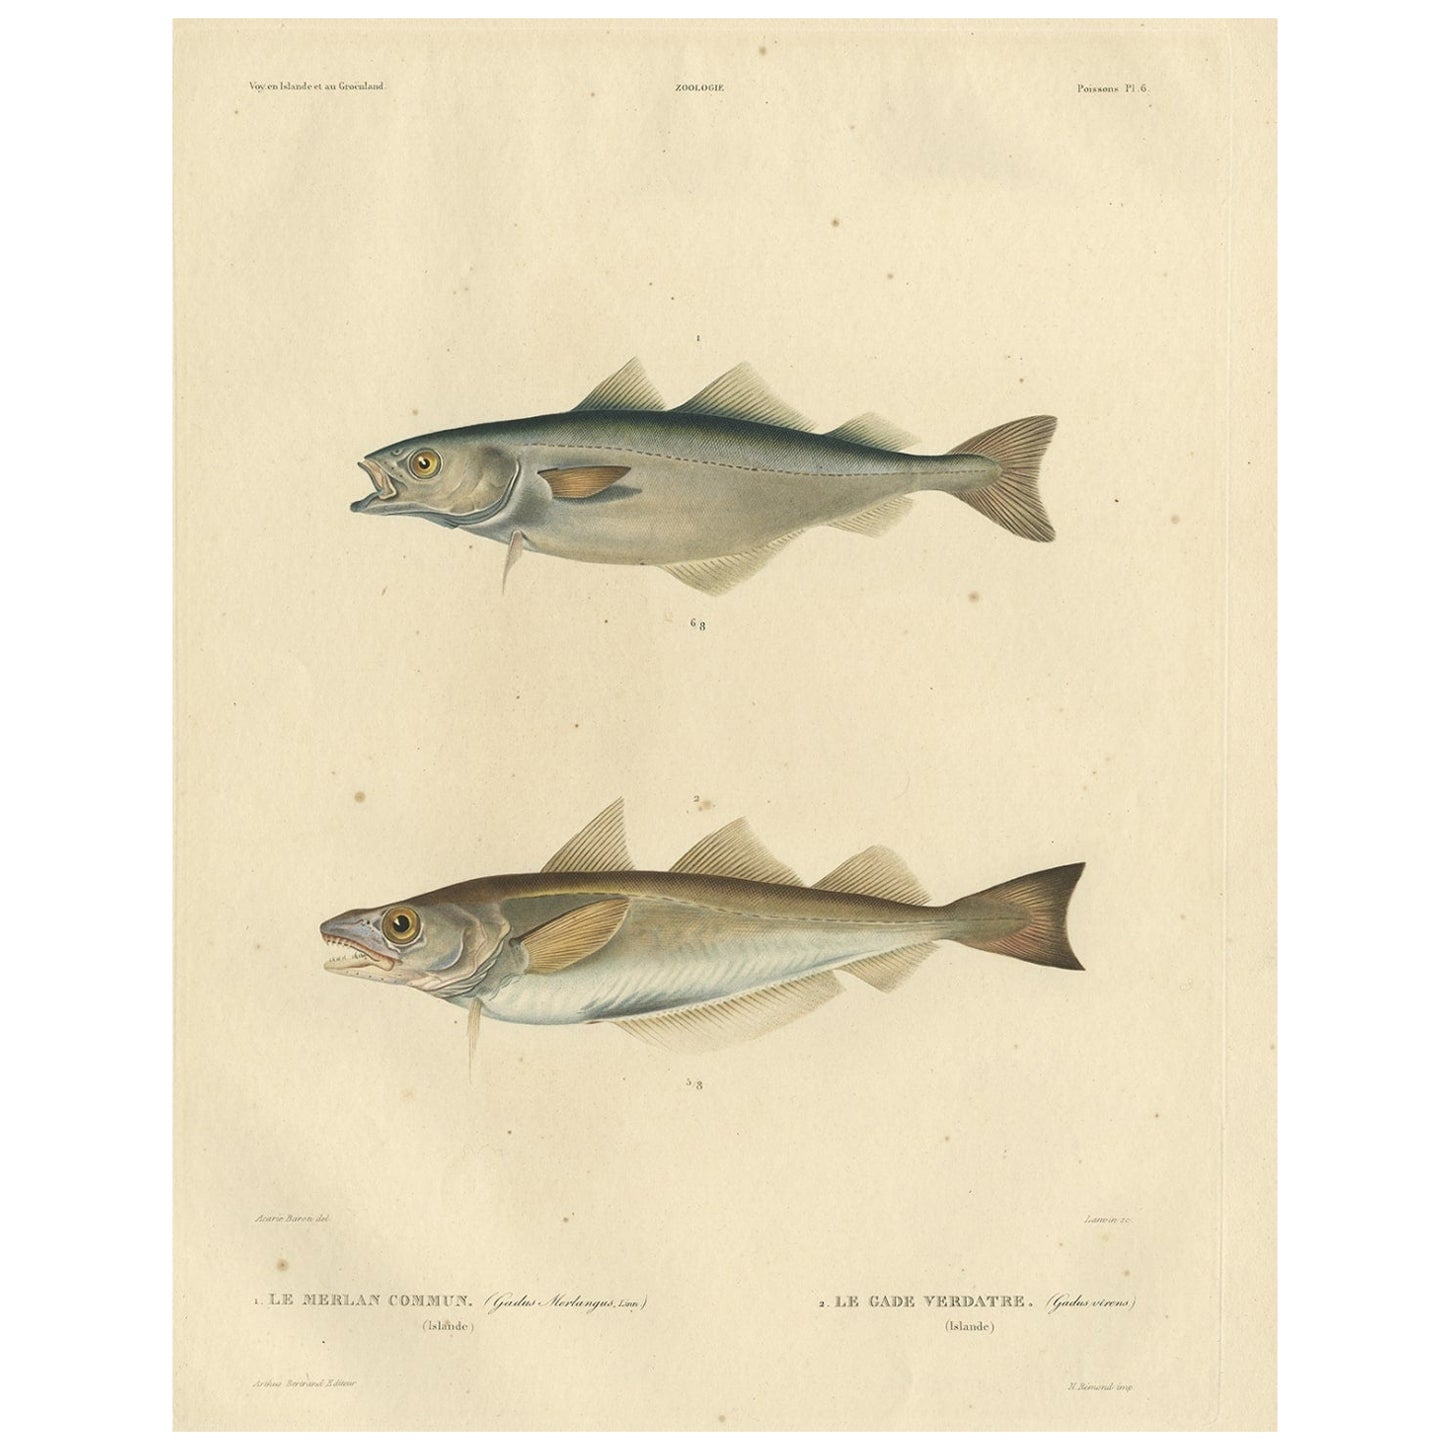 Original Antique Hand-coloured Fish Print of the Whiting, Merling & Saithe, 1842